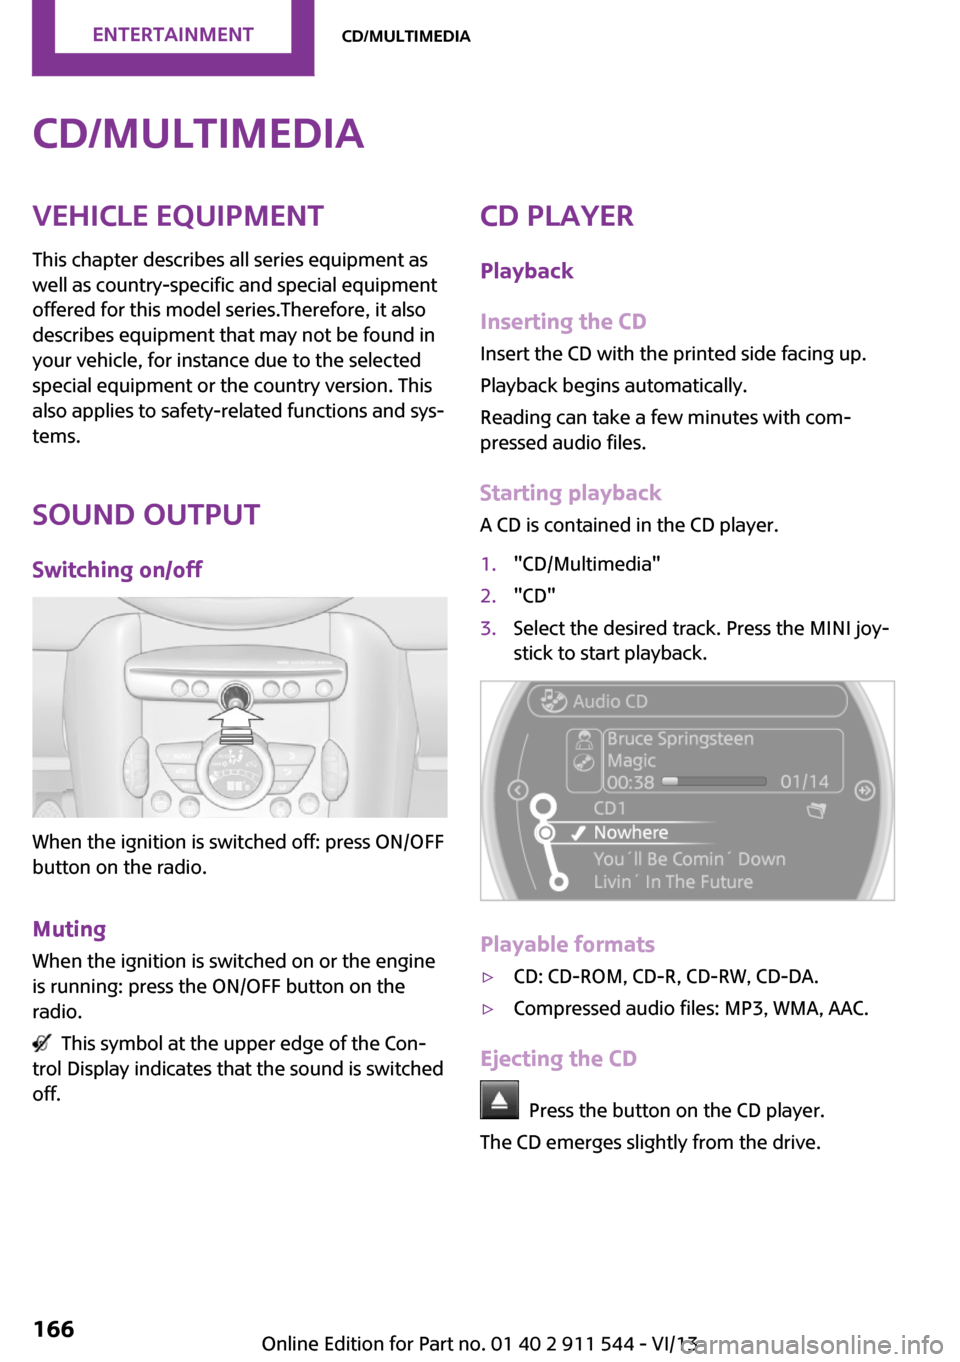 MINI Paceman 2014  Owners Manual (Mini Connected) CD/multimediaVehicle equipment
This chapter describes all series equipment as
well as country-specific and special equipment
offered for this model series.Therefore, it also
describes equipment that m